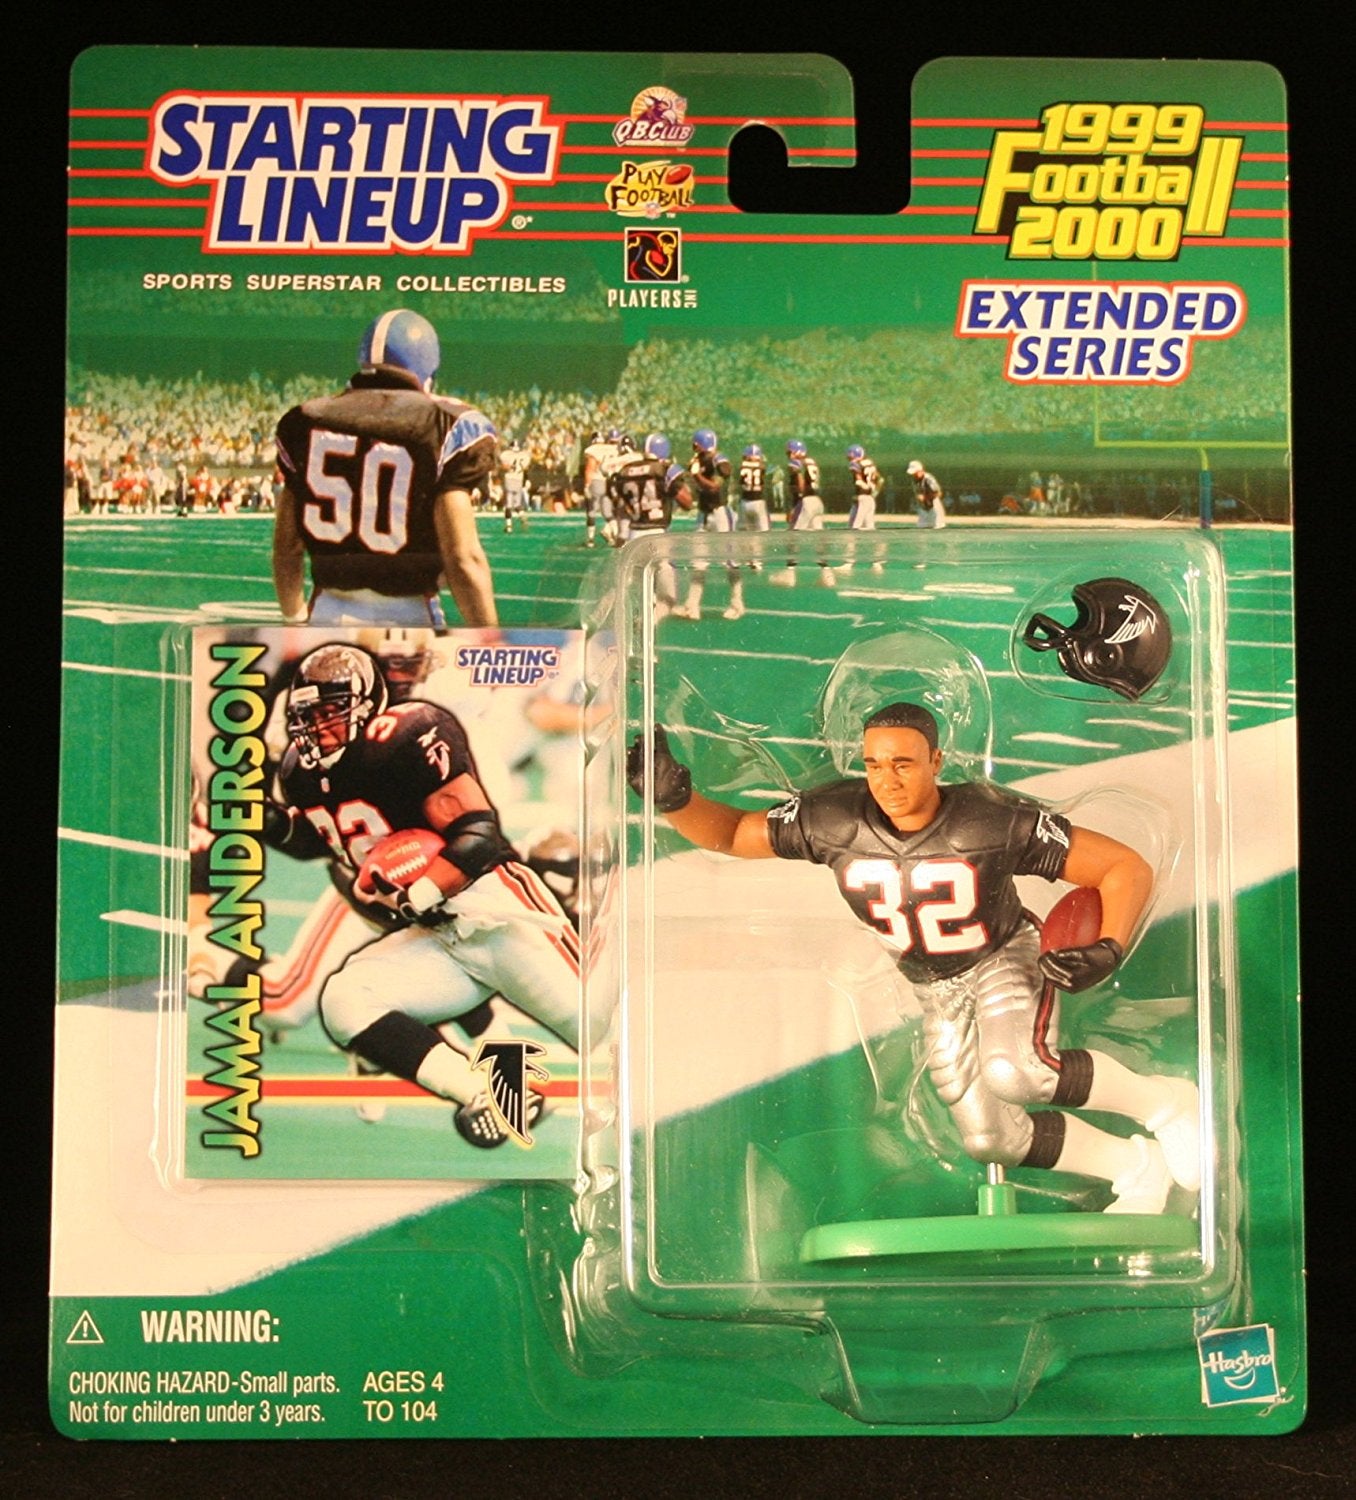 JAMAL ANDERSON / ATLANTA FALCONS 1999-2000 NFL * EXTENDED SERIES * Starting Lineup Action Figure & Exclusive NFL Collector Trading Card